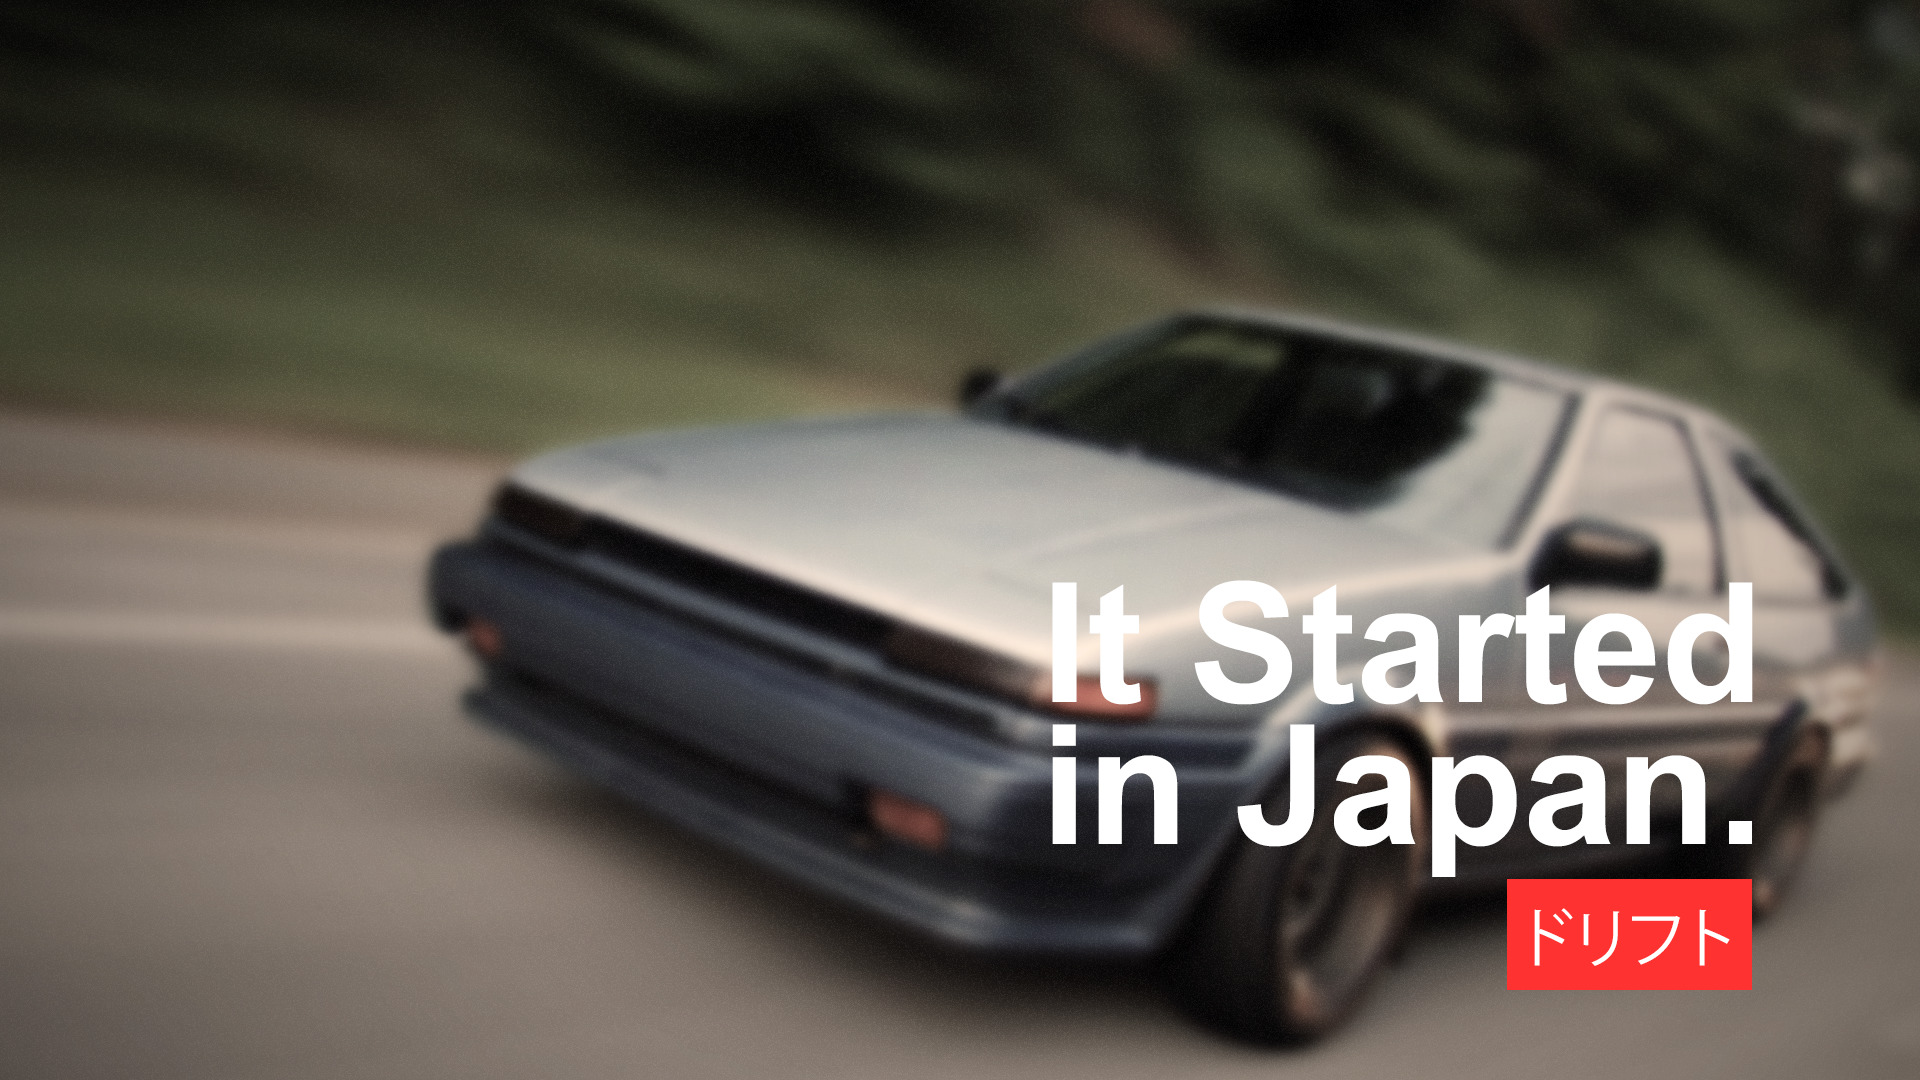 car, Japan, Drift, Drifting, Racing, Vehicle, Japanese Cars, Import, Tuning, Modified, Toyota, AE86, Toyota AE86, Initial D, It Started In Japan Wallpaper